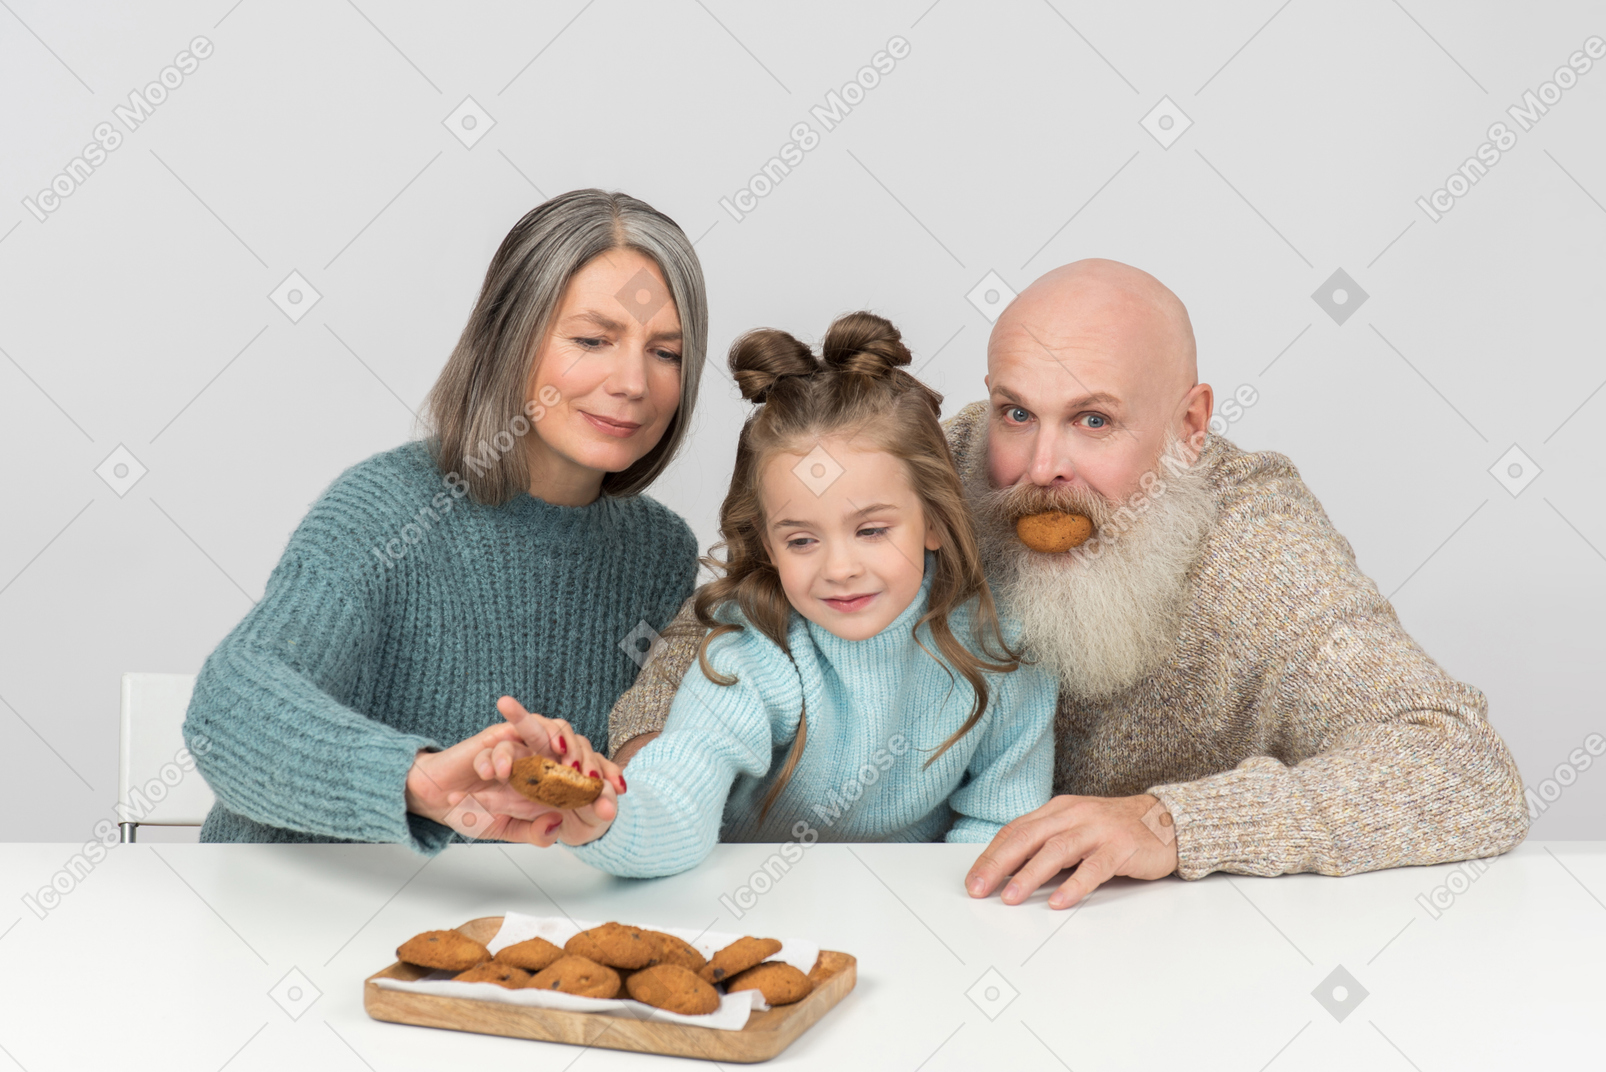 Grandpa can't stop fooling around and grandma stops kid from having another cookie